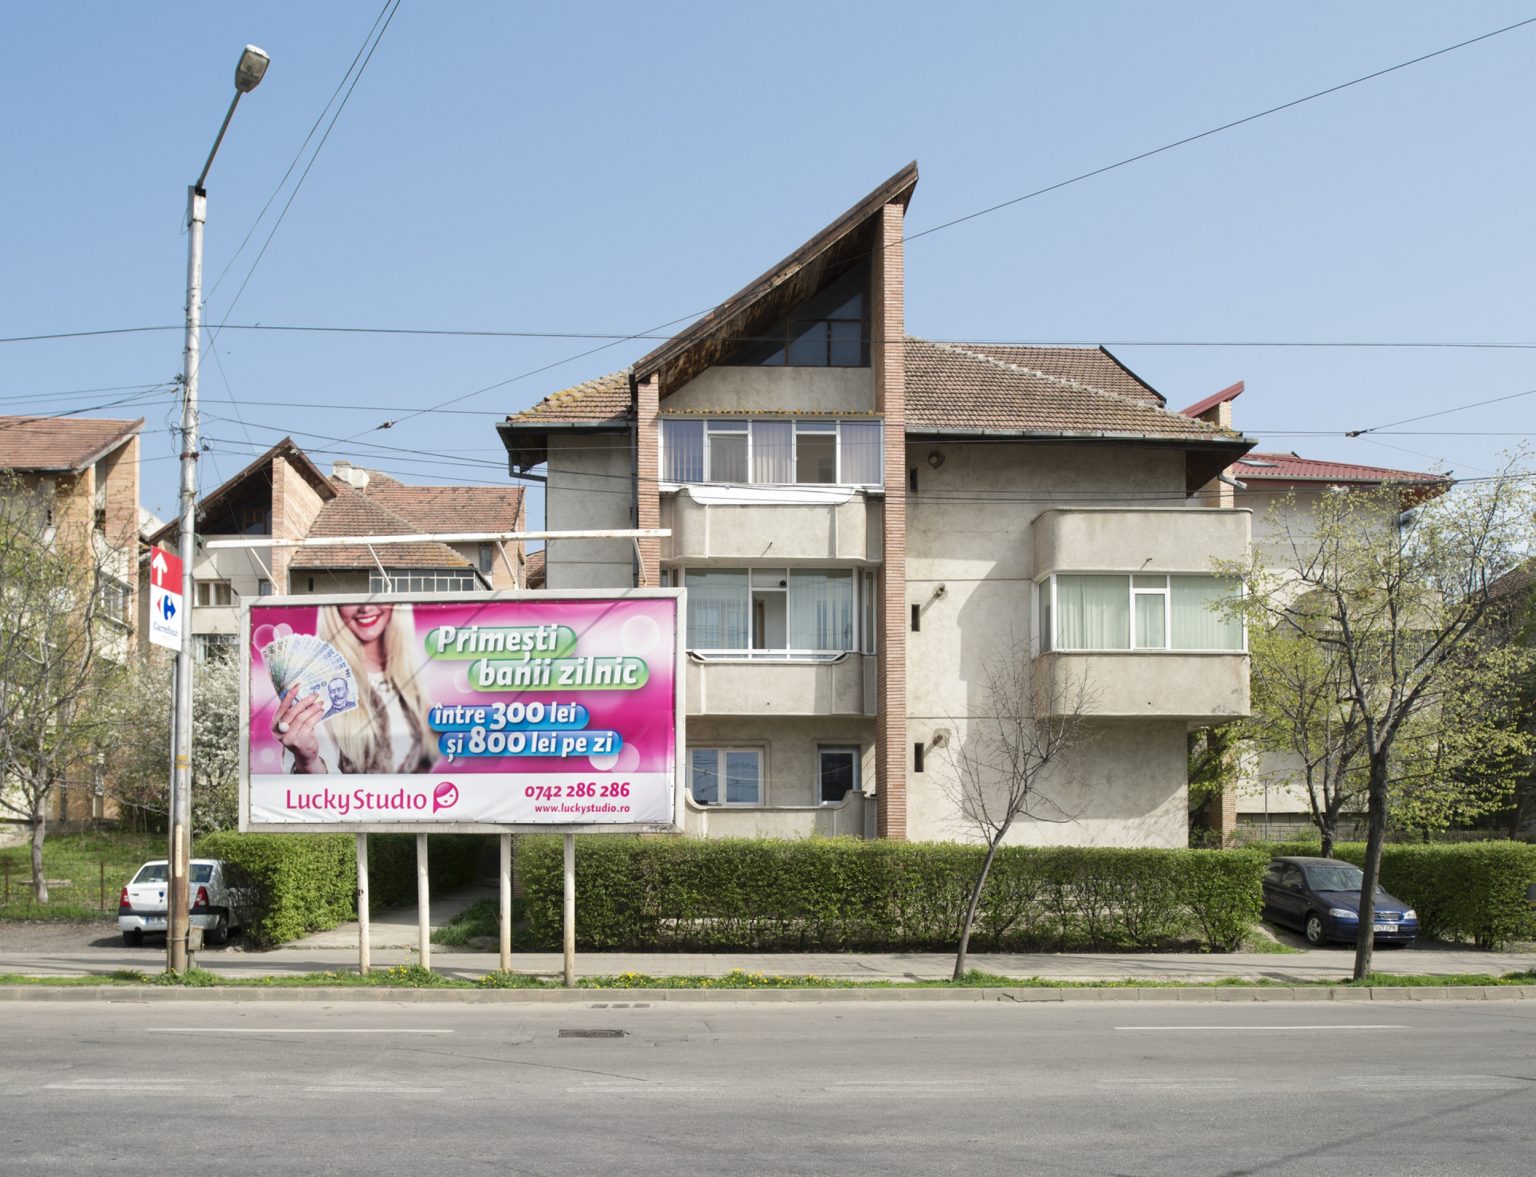 Romania, Ia?i, April 2016: an advertisement billboard in a street of the city promising daily earnings for the cam models between 300 and 800 RON (approx. between 66 and 178 euros).